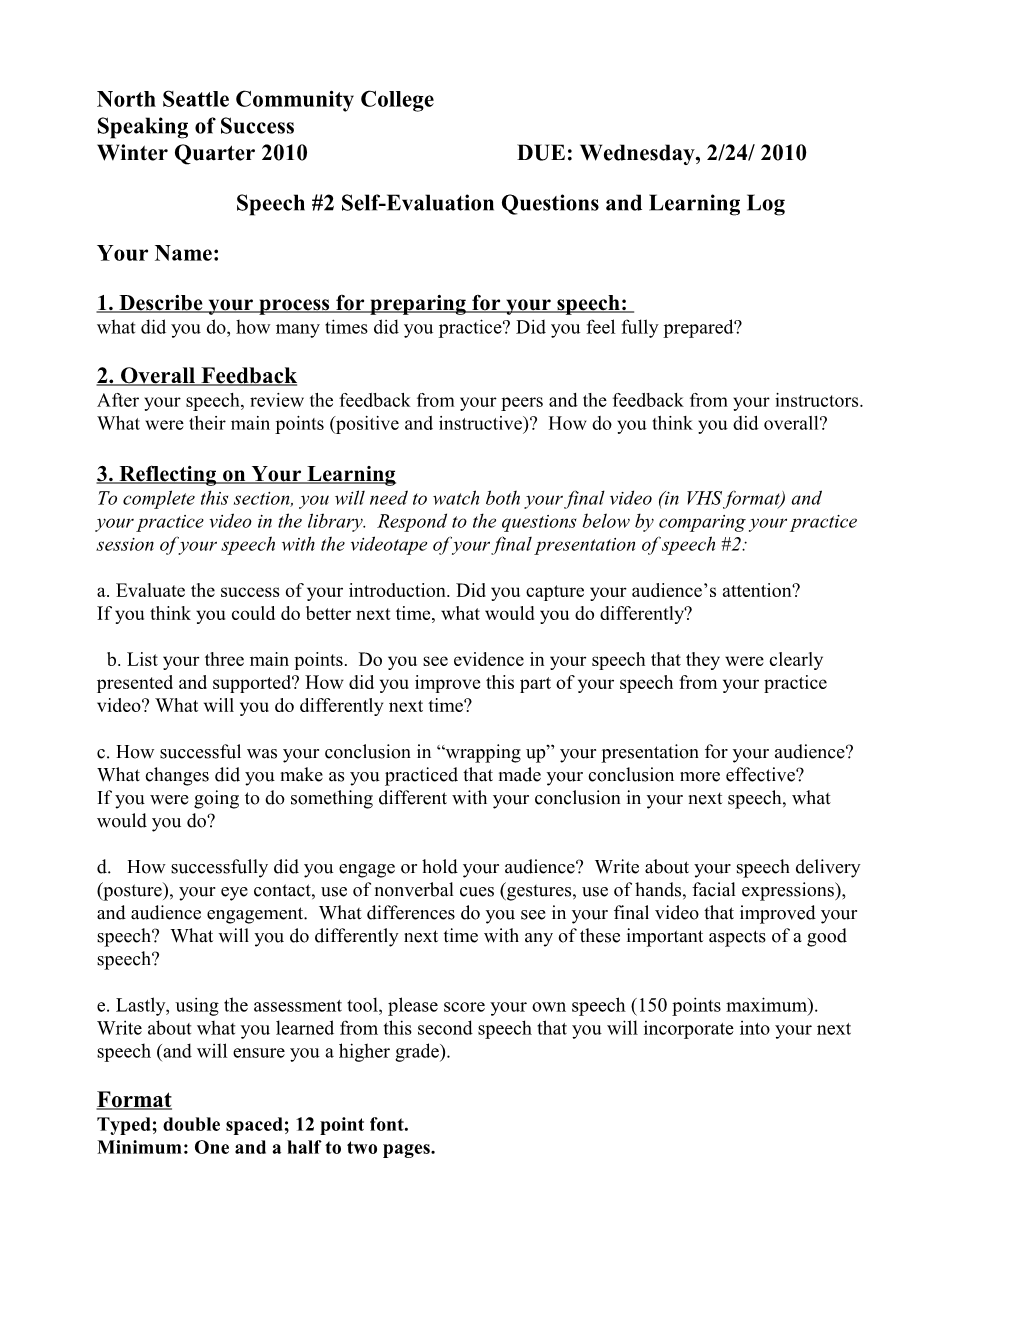 Speech #2 Self-Evaluation Questions and Learning Log